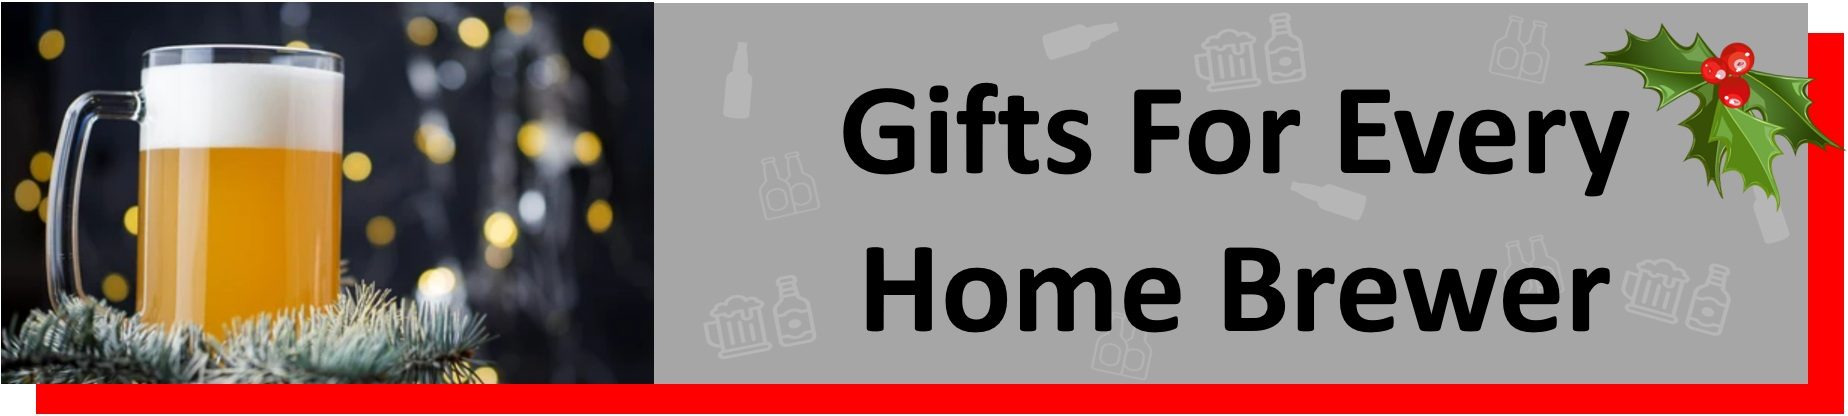 Best Gifts For Home Brewers | Home Brew Gifts For Christmas | Best Christmas Gifts For Home Brewers